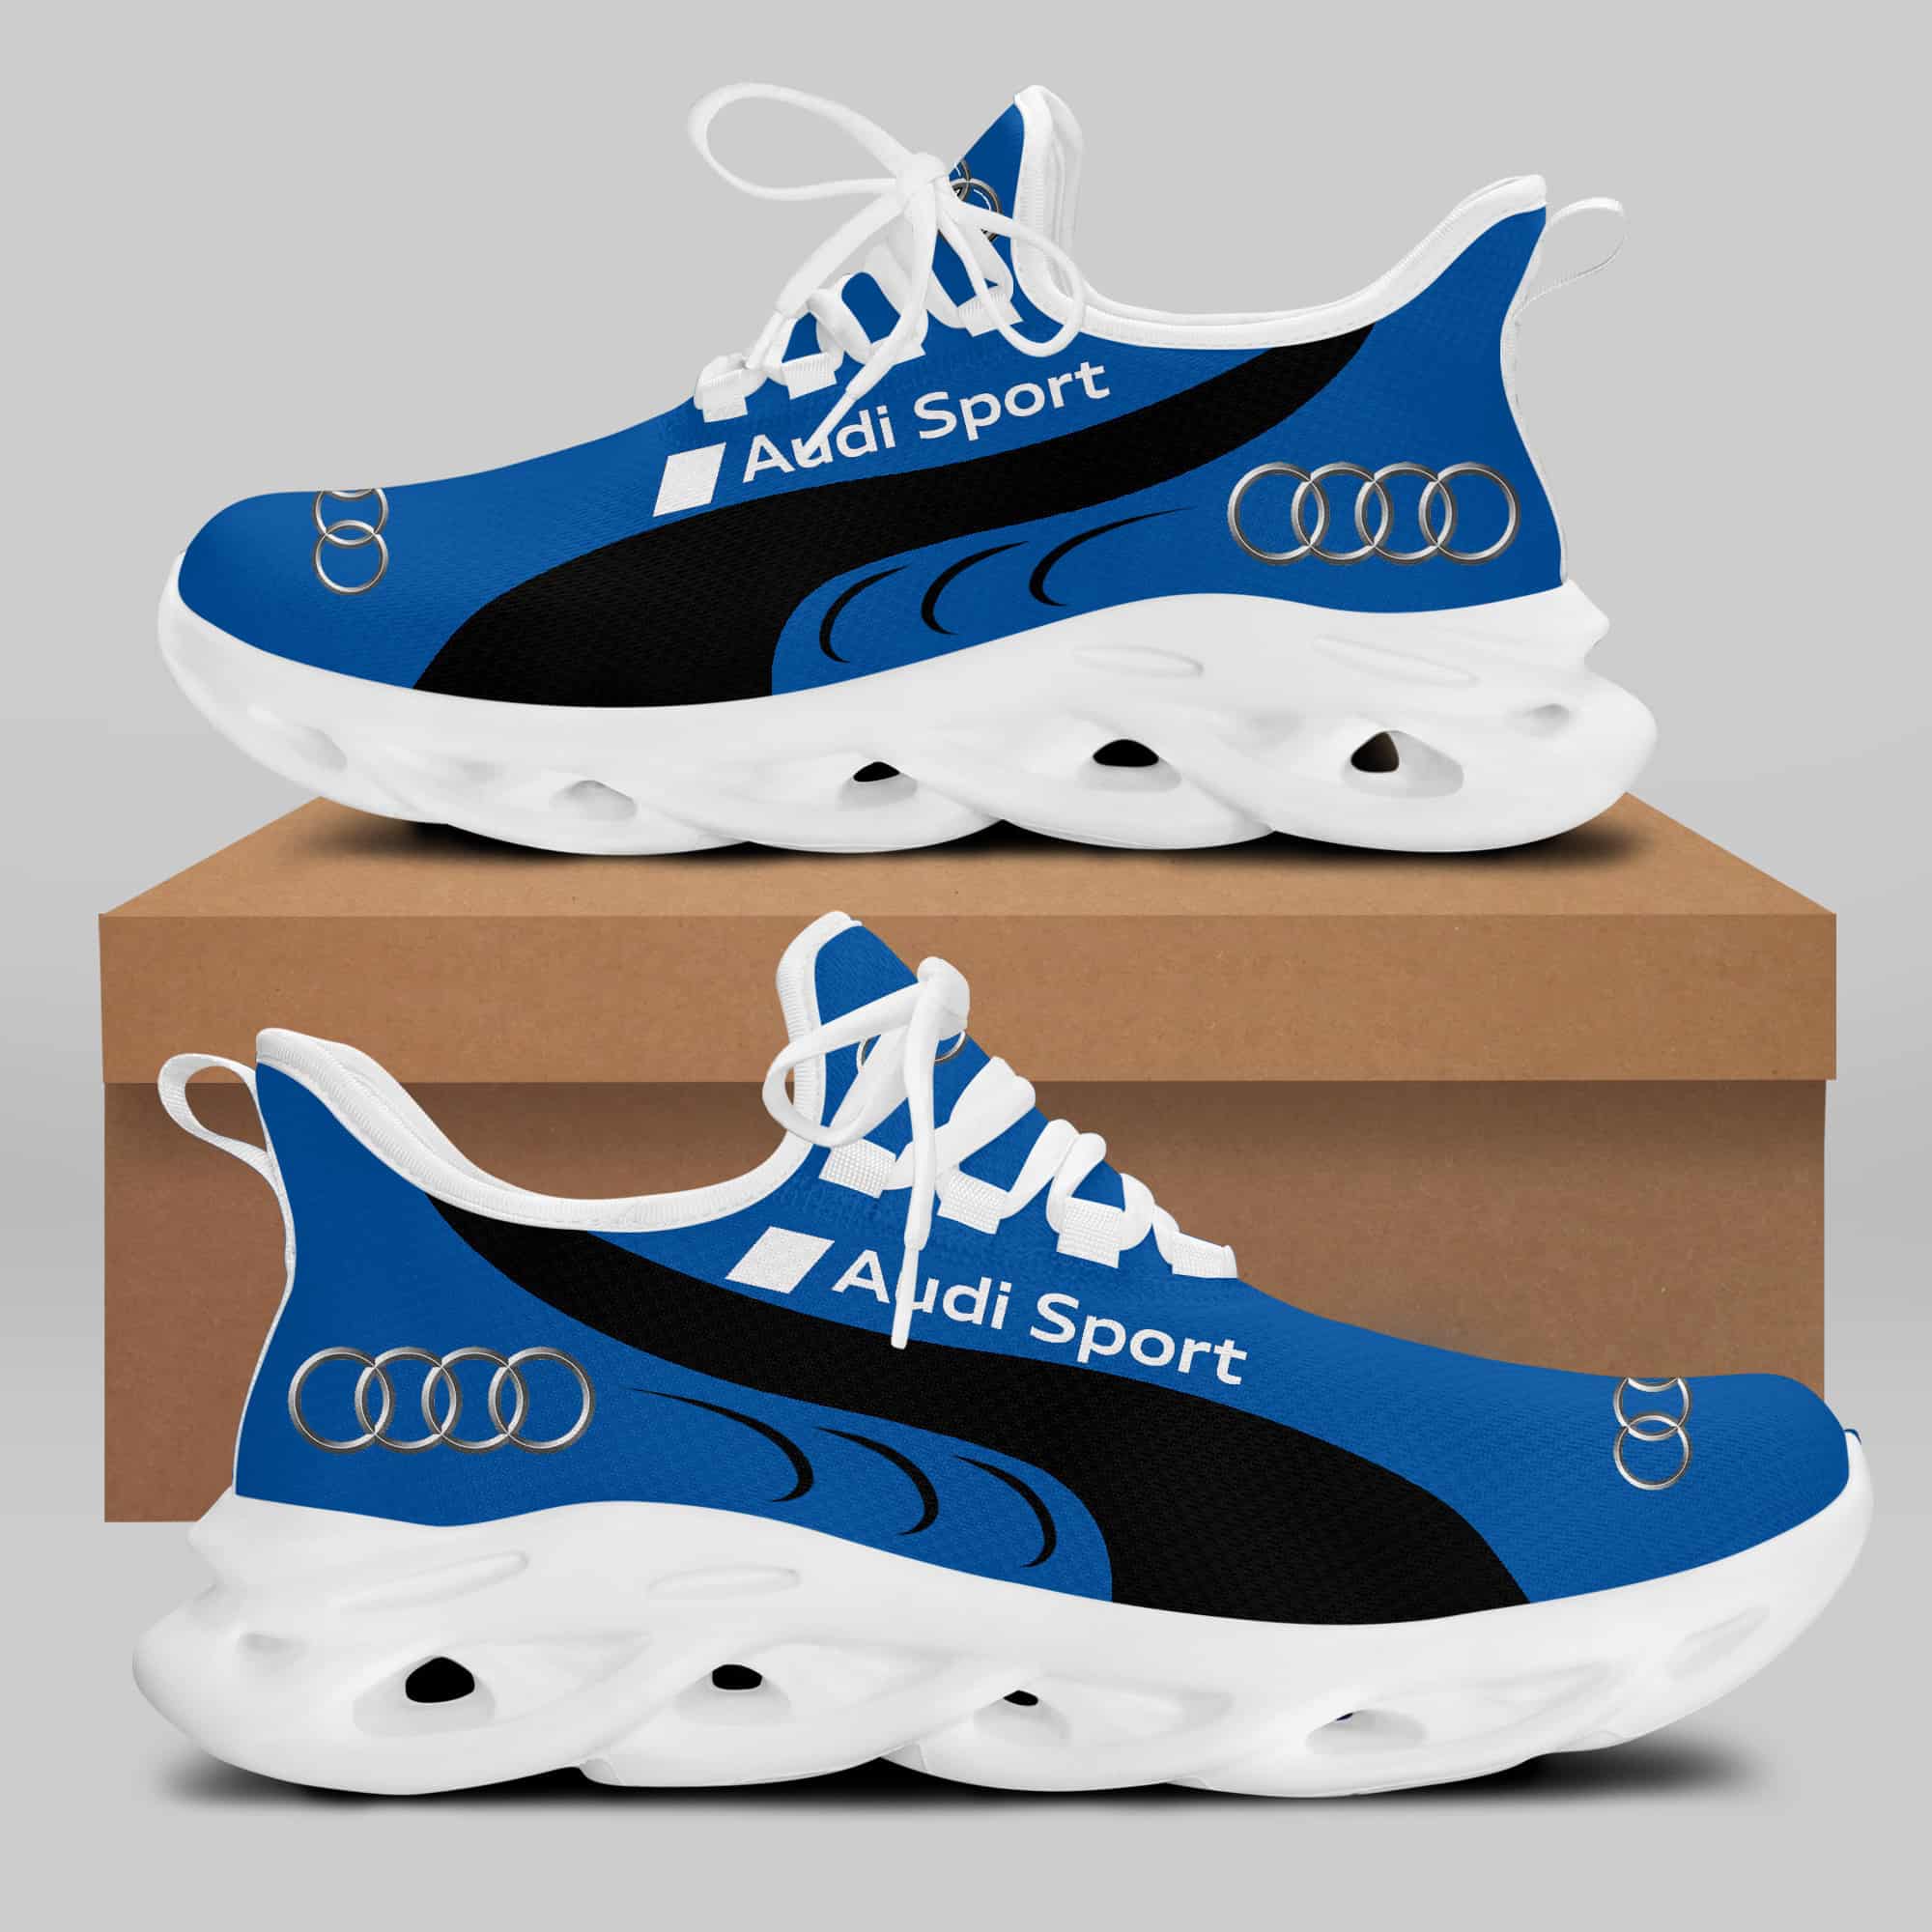 Audi Sport Running Shoes Max Soul Shoes Sneakers Ver 10 2